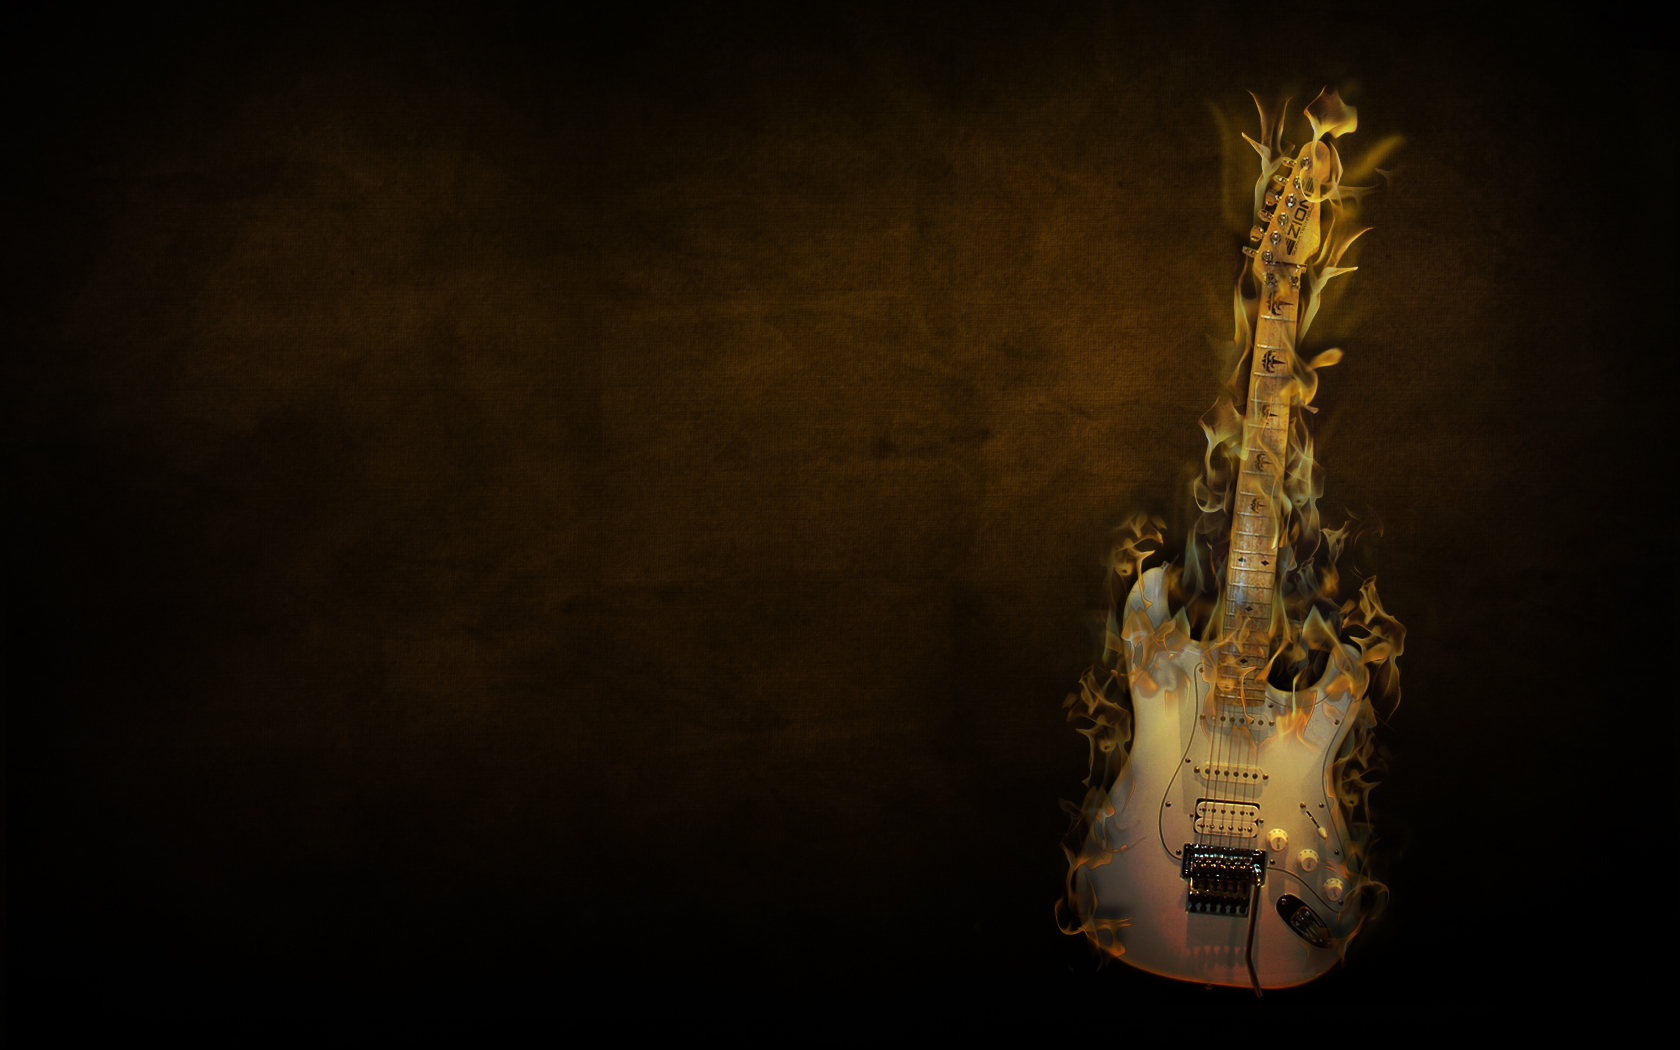 Free Guitar On Fire Wallpapers, Free Guitar On Fire HD Wallpapers